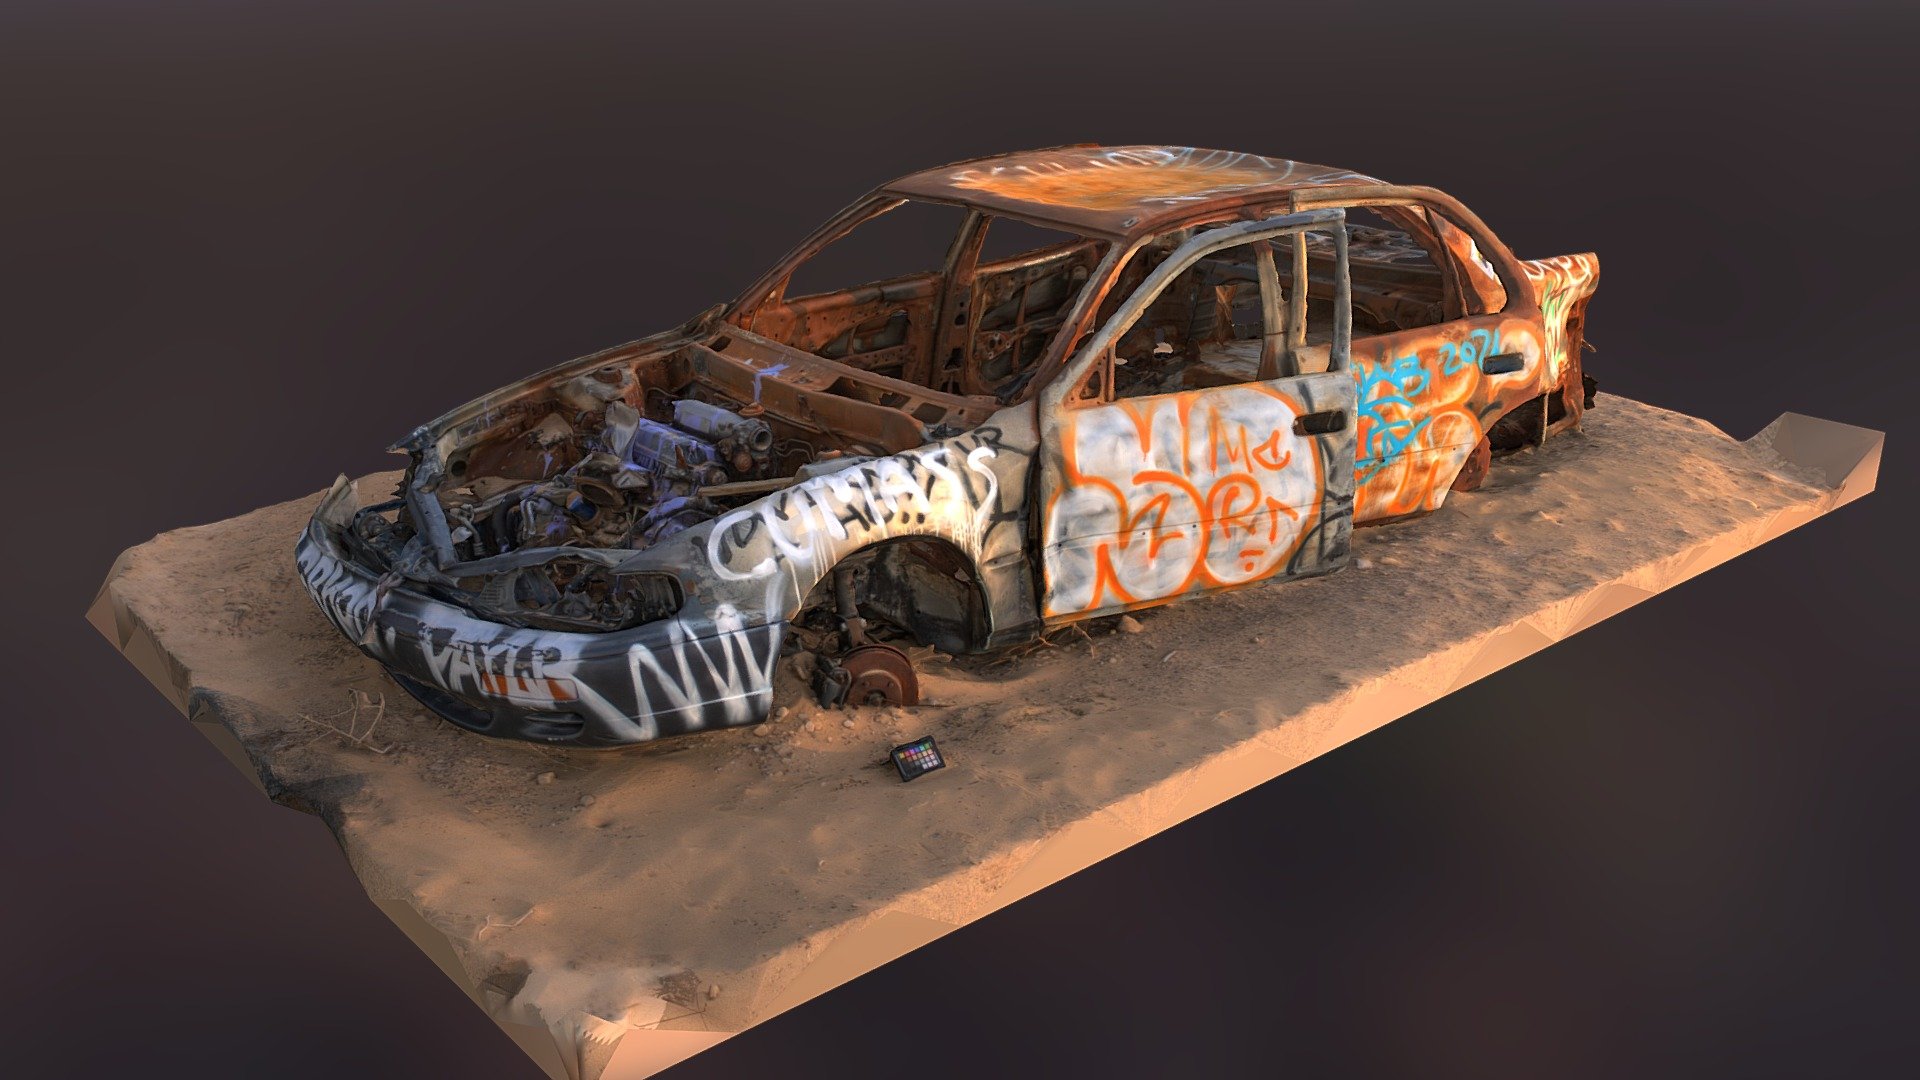 Photogrammetry scan of a burned out car covered in graffiti. 
scanned with a canon 90d and processed in reality capture this is the raw scan decimated to 5% of original scan 

I took this scan in Slab City California 

instagram.com/austinbeaulier
twitter.com/austinbeaulier - Destroyed Graffiti vehicle damaged car scan - Buy Royalty Free 3D model by Austin Beaulier (@Austin.Beaulier) 3d model